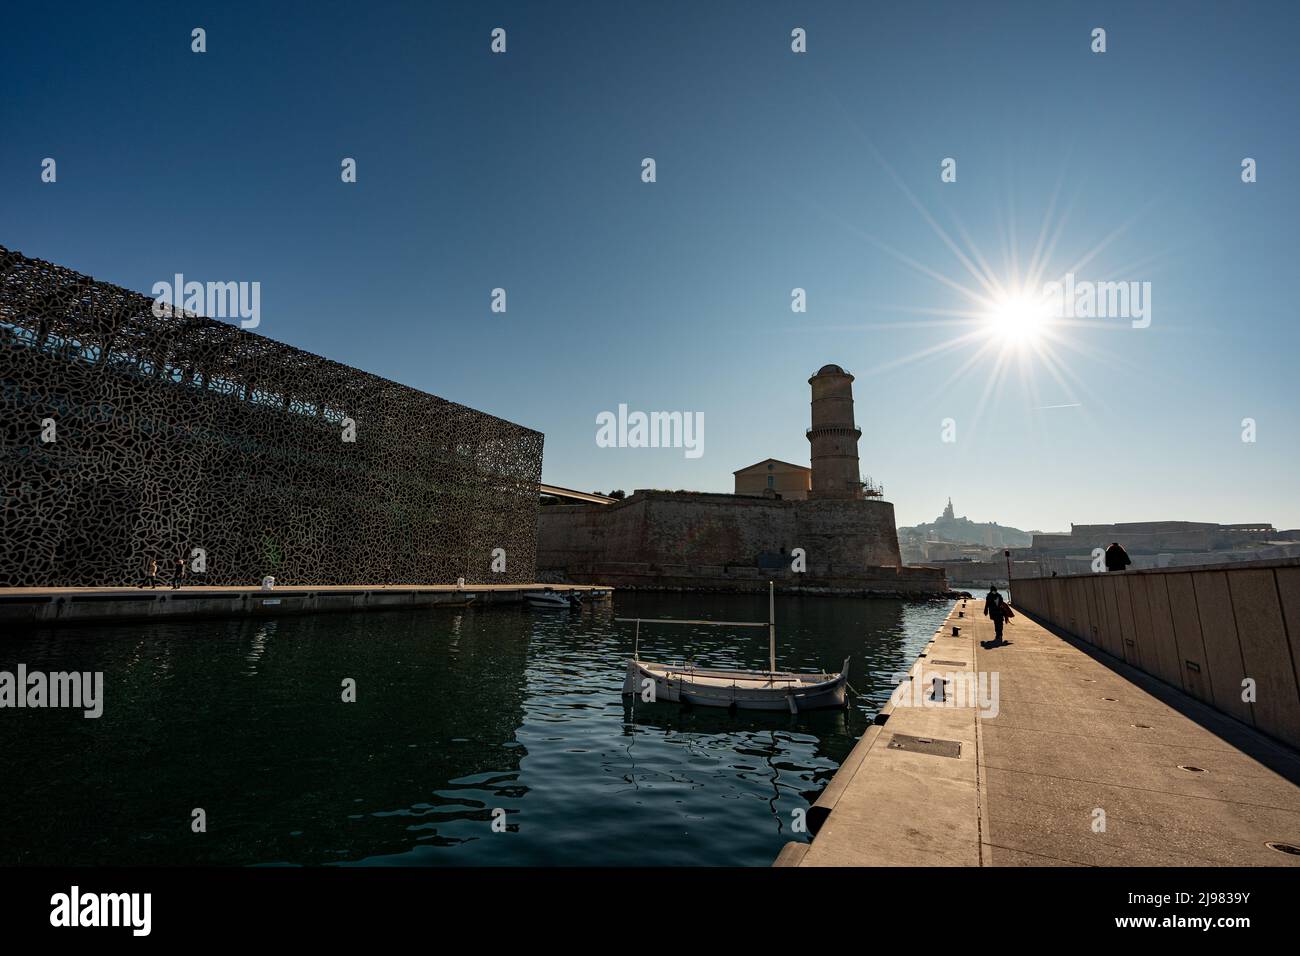 France. Marseille. Bouche-du-Rhône. The Mucem. People walking at Museum of European and Mediterranean Civilizations Fort Saint-Jean in the background Stock Photo